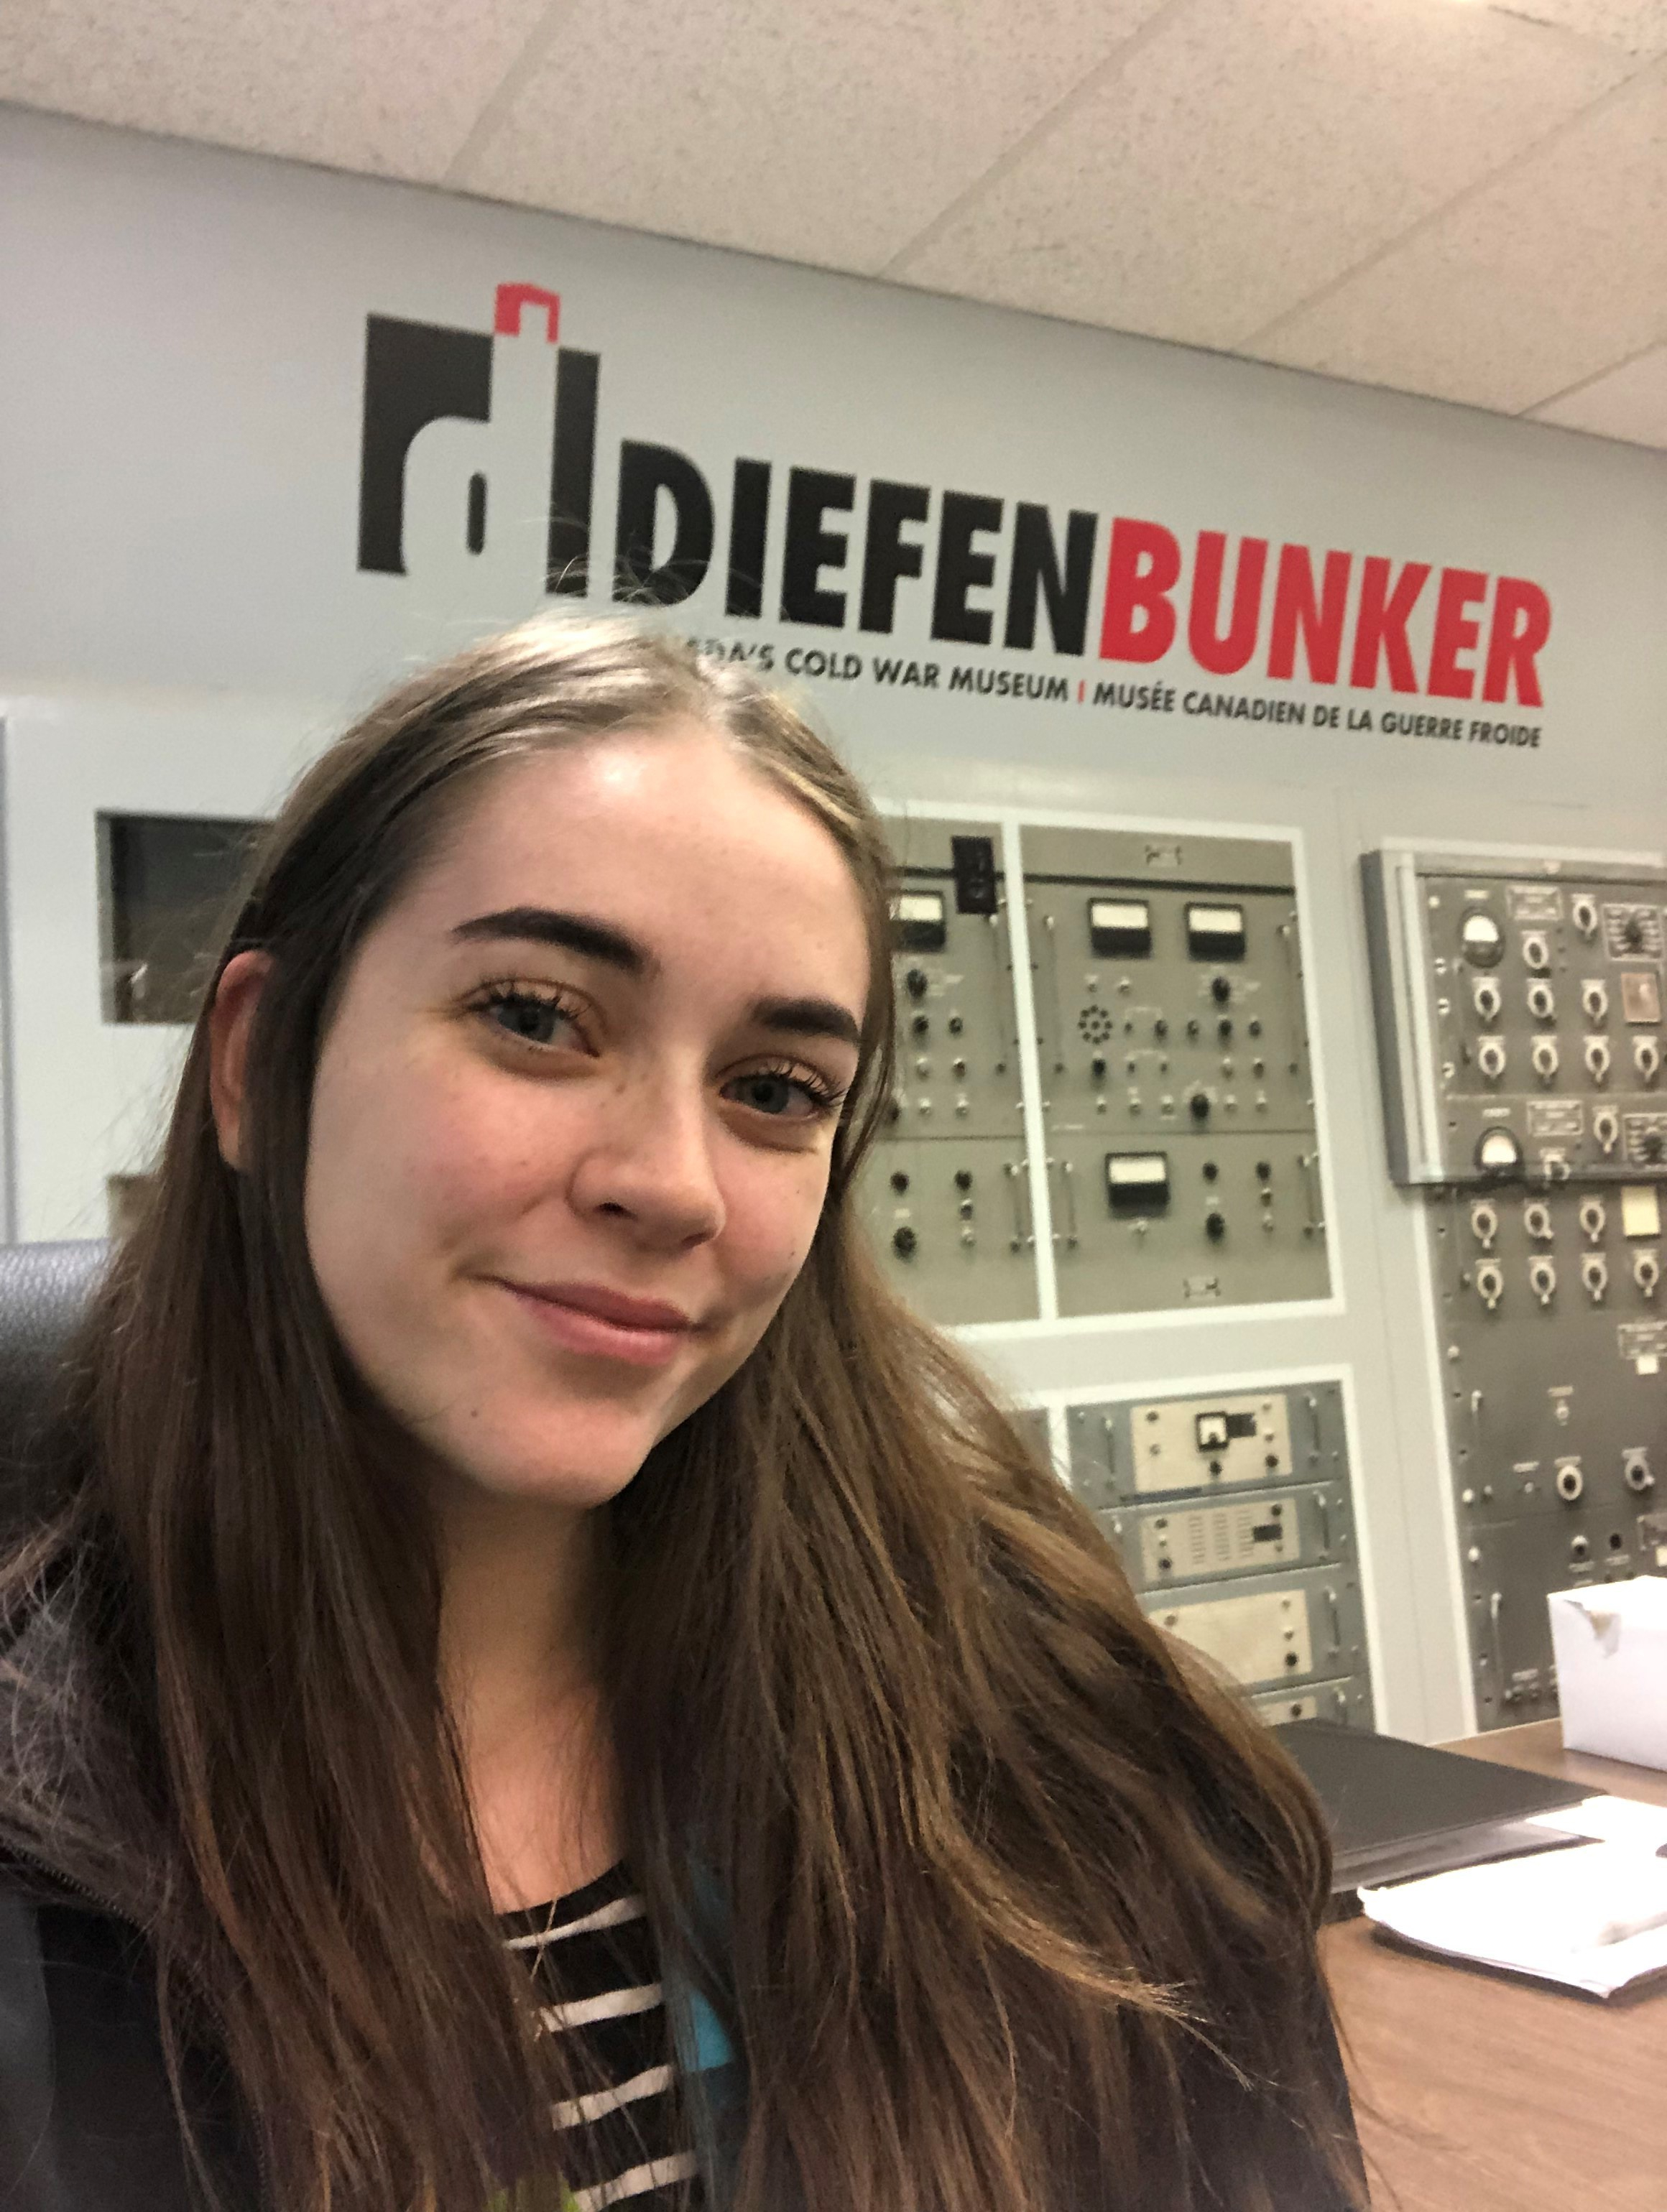 Skylar poses in front of the Diefenbunker sign located at the Welcome Desk.